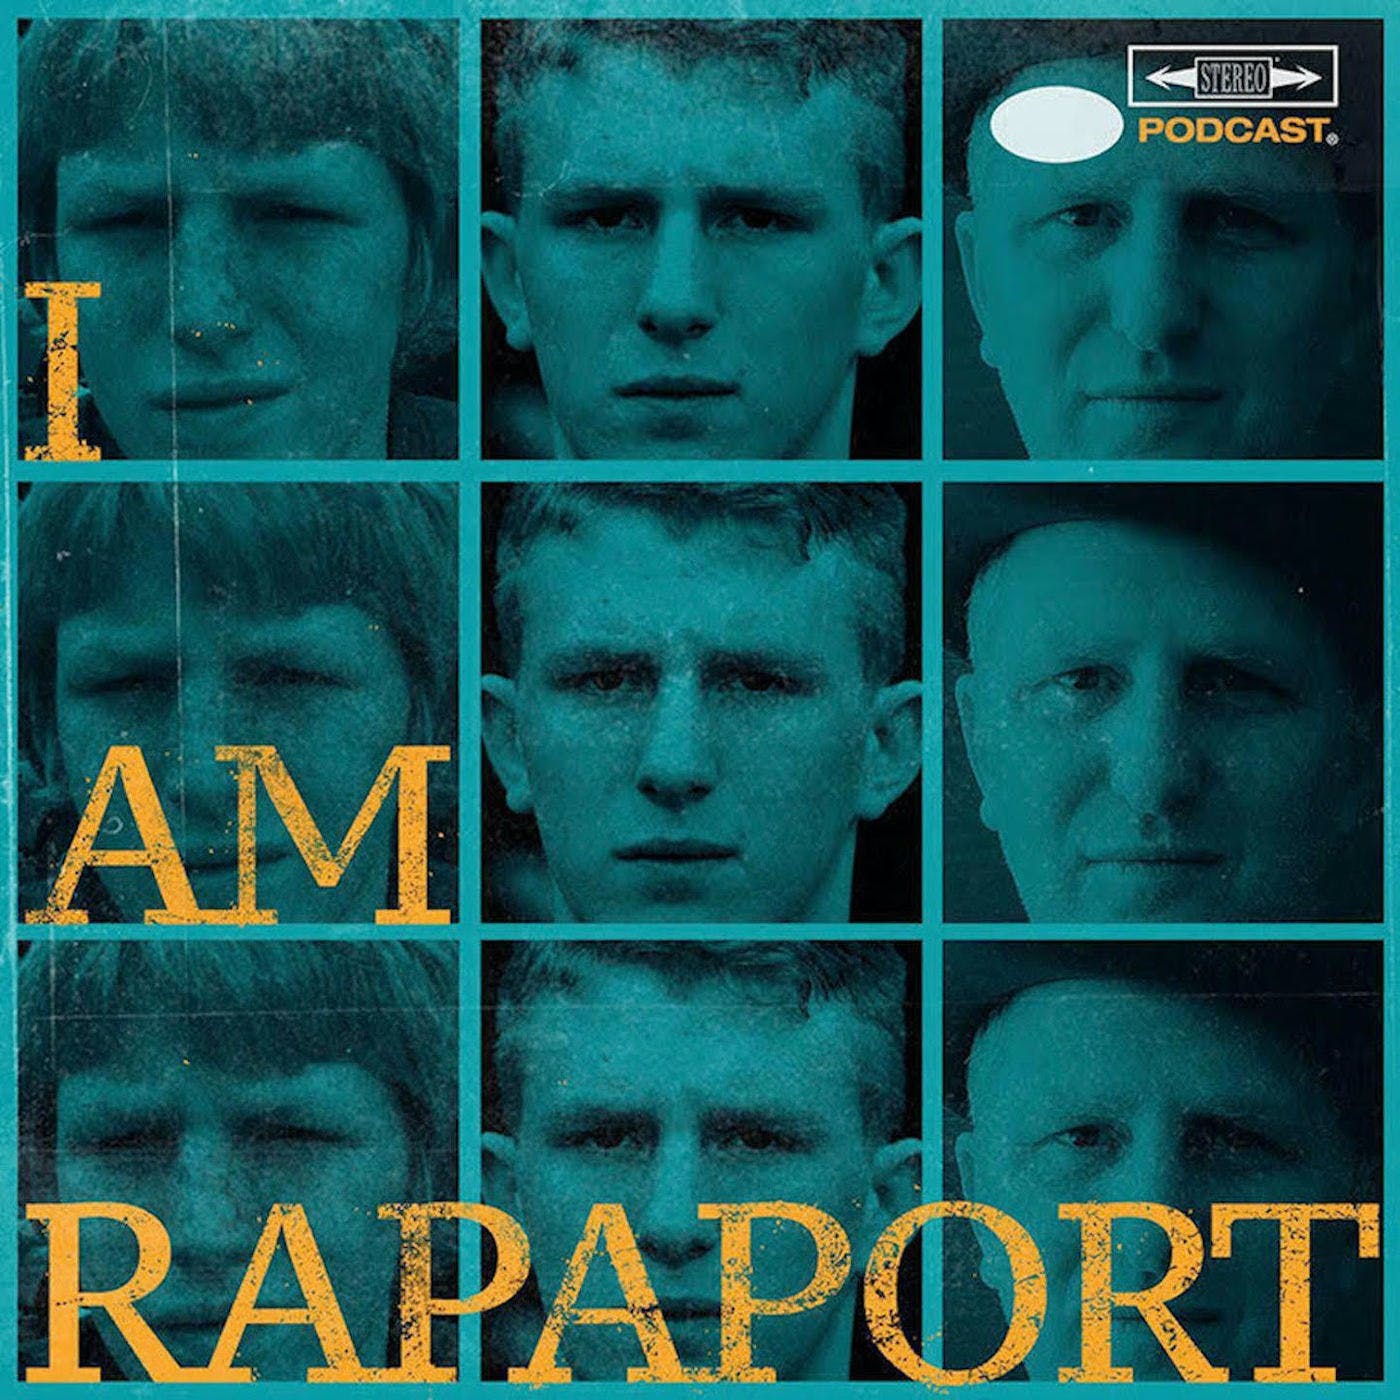 EP 467 - TIGER WOODS GO TO RED LOBSTER/I AM RAPAPORT NEWSLETTER/WHERE THE TAPES AT DUKE?/J(oke)BA/KANYE WEST STOP MAKING MUSIC/JUNGLE CRUISE UPROAR